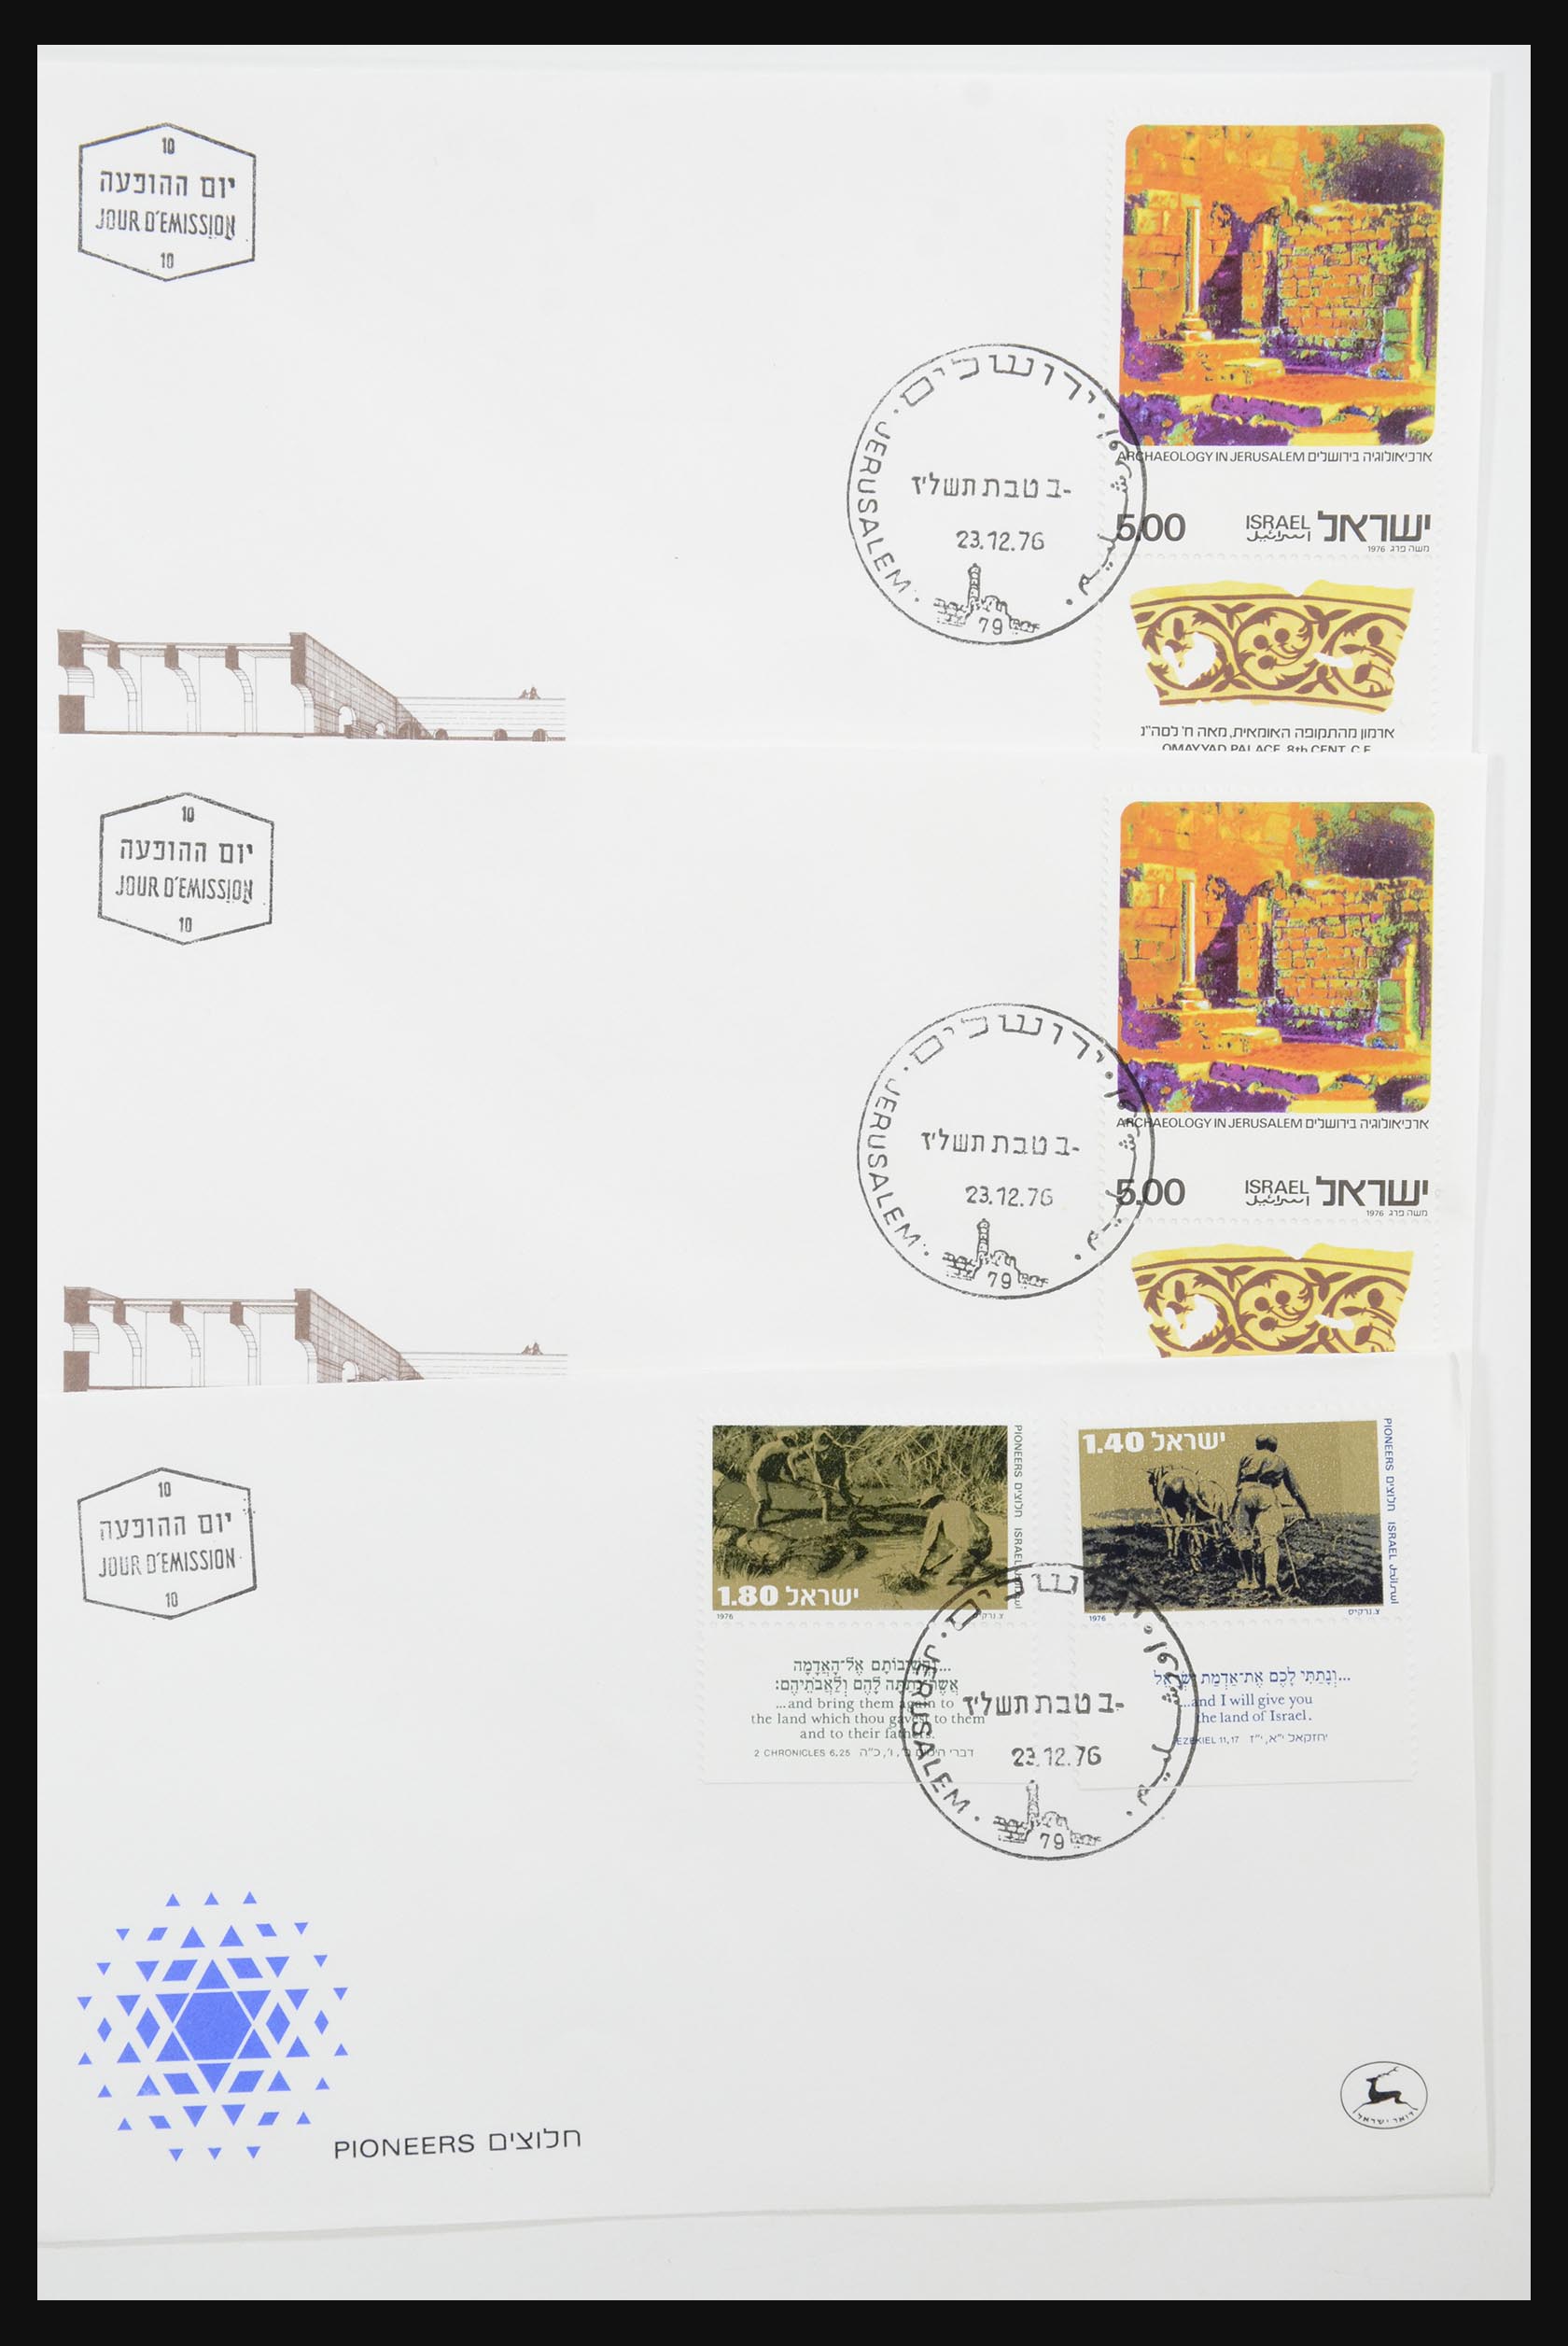 31924 002 - 31924 Israël fdc-collectie 1957-2003.